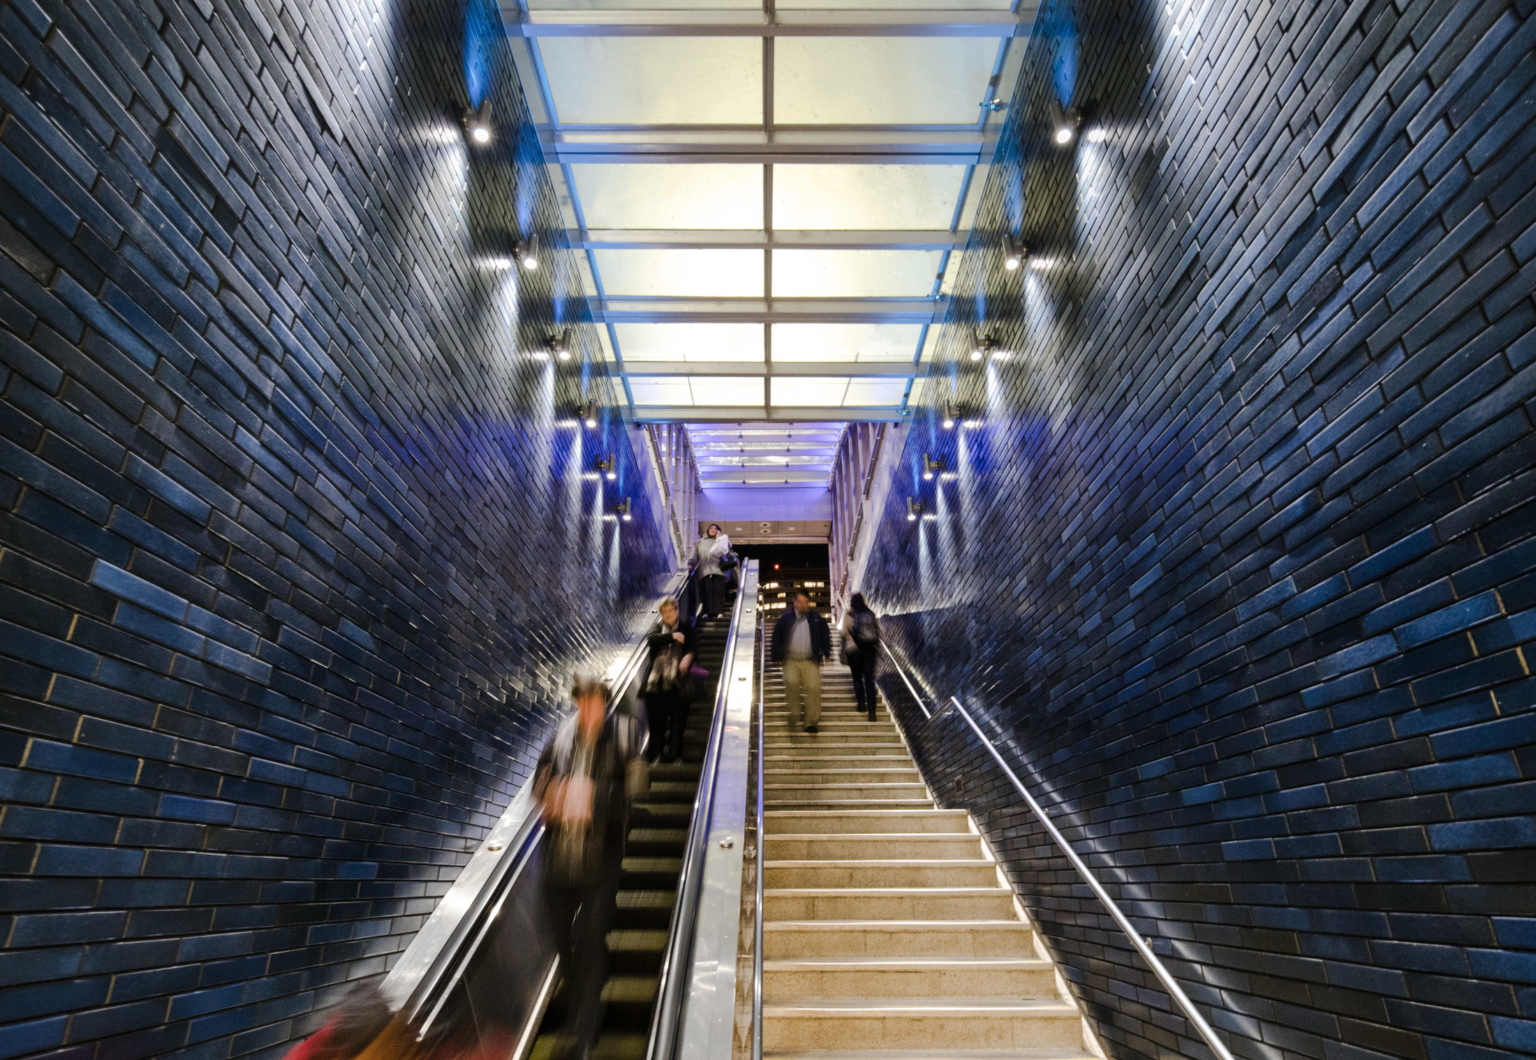 a glass canopy over a subterranean staircase with ceramic lined walls